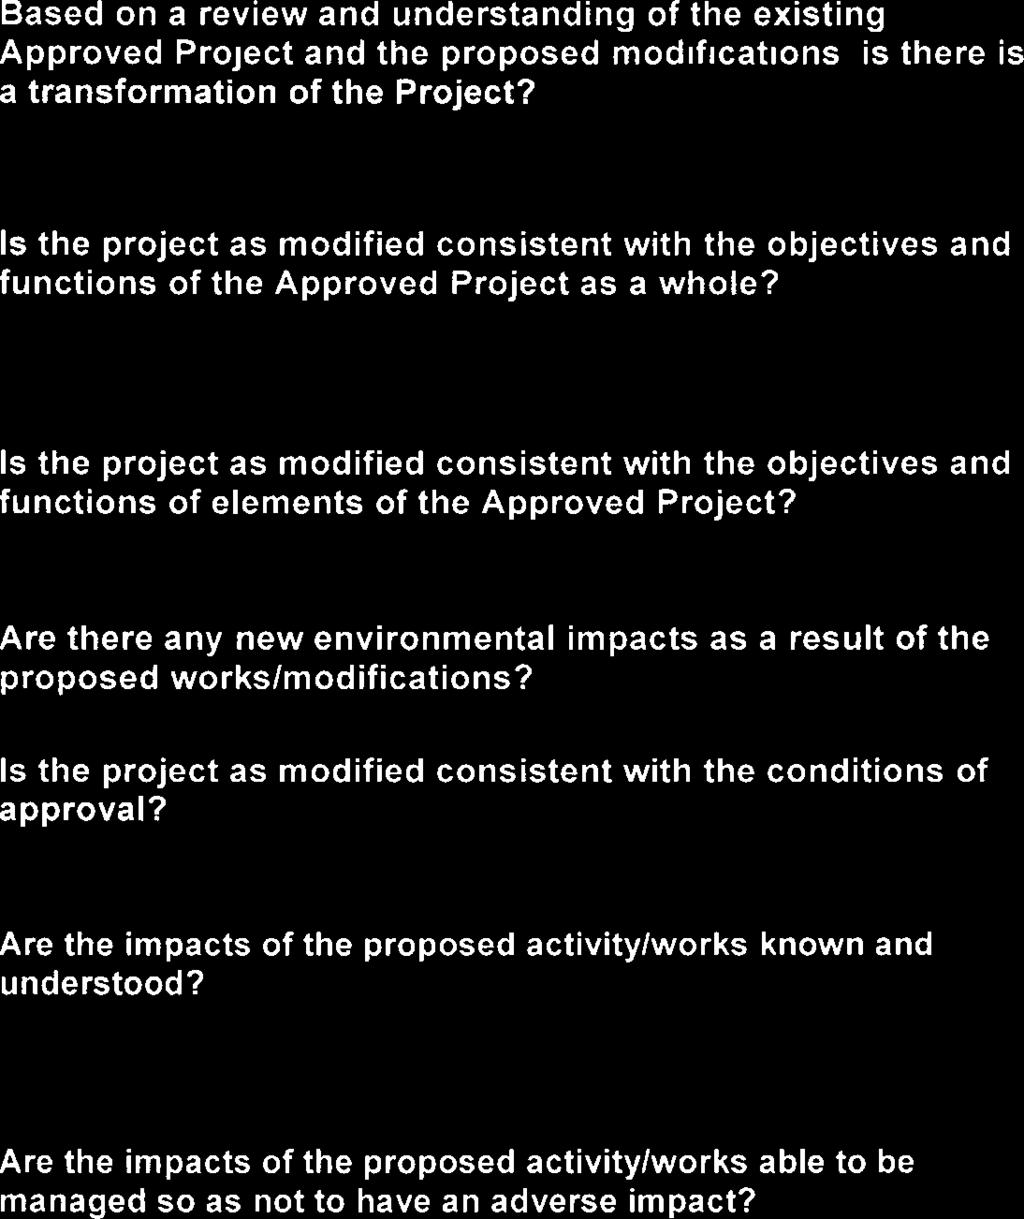 Are the impacts of the proposed activity/works able to be managed so as not to have an adverse impact? No. The proposed works would not transform the project.